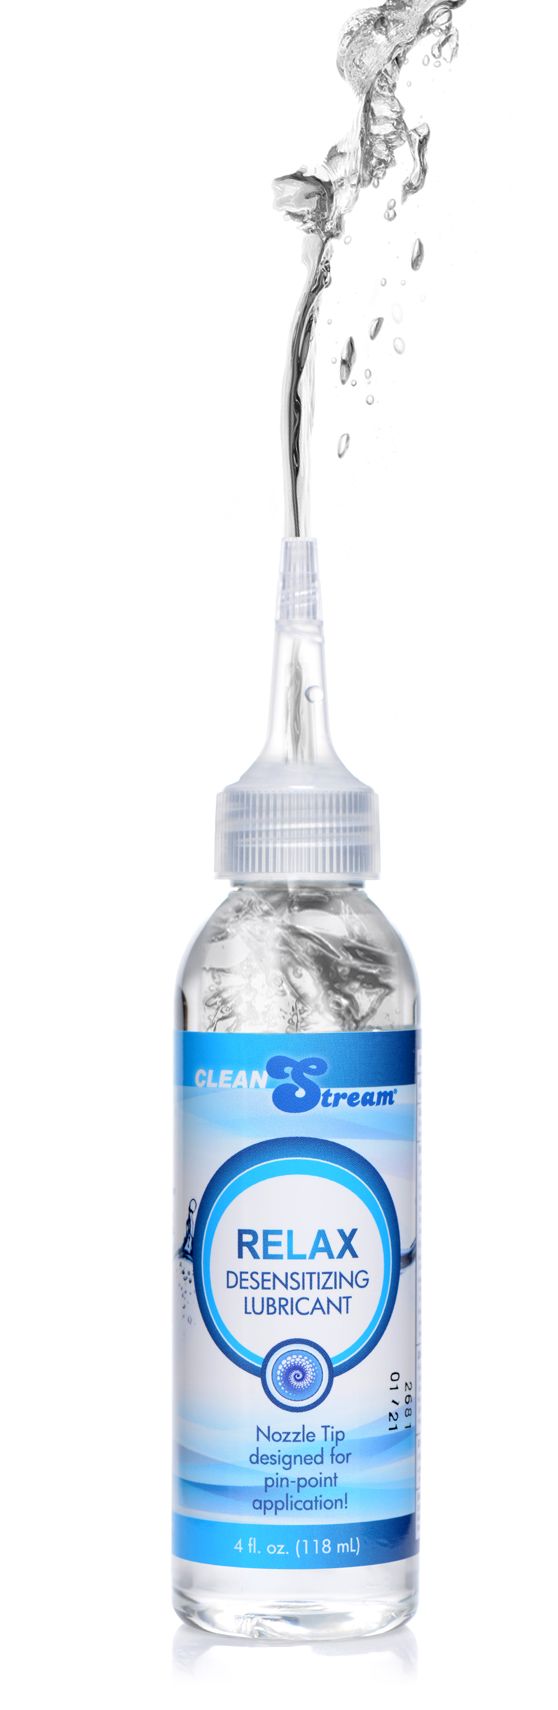 Relax Desensitizing Lubricant With Nozzle Tip – 4 oz.